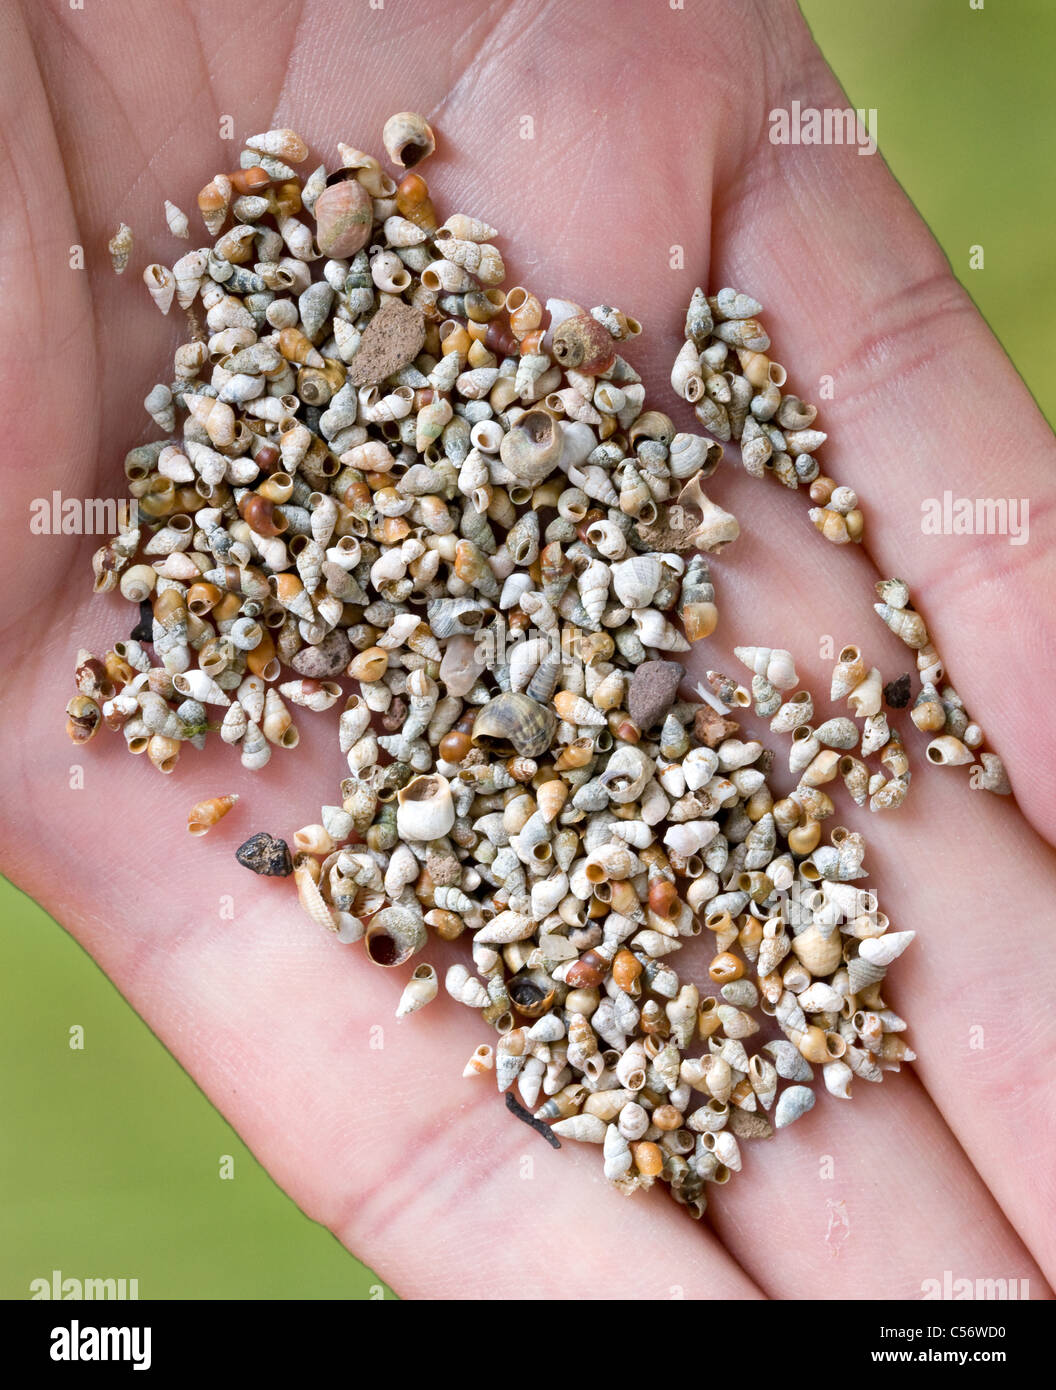 https://c8.alamy.com/comp/C56WD0/wader-food-in-the-form-of-tiny-sea-snail-and-other-mollusc-shells-C56WD0.jpg